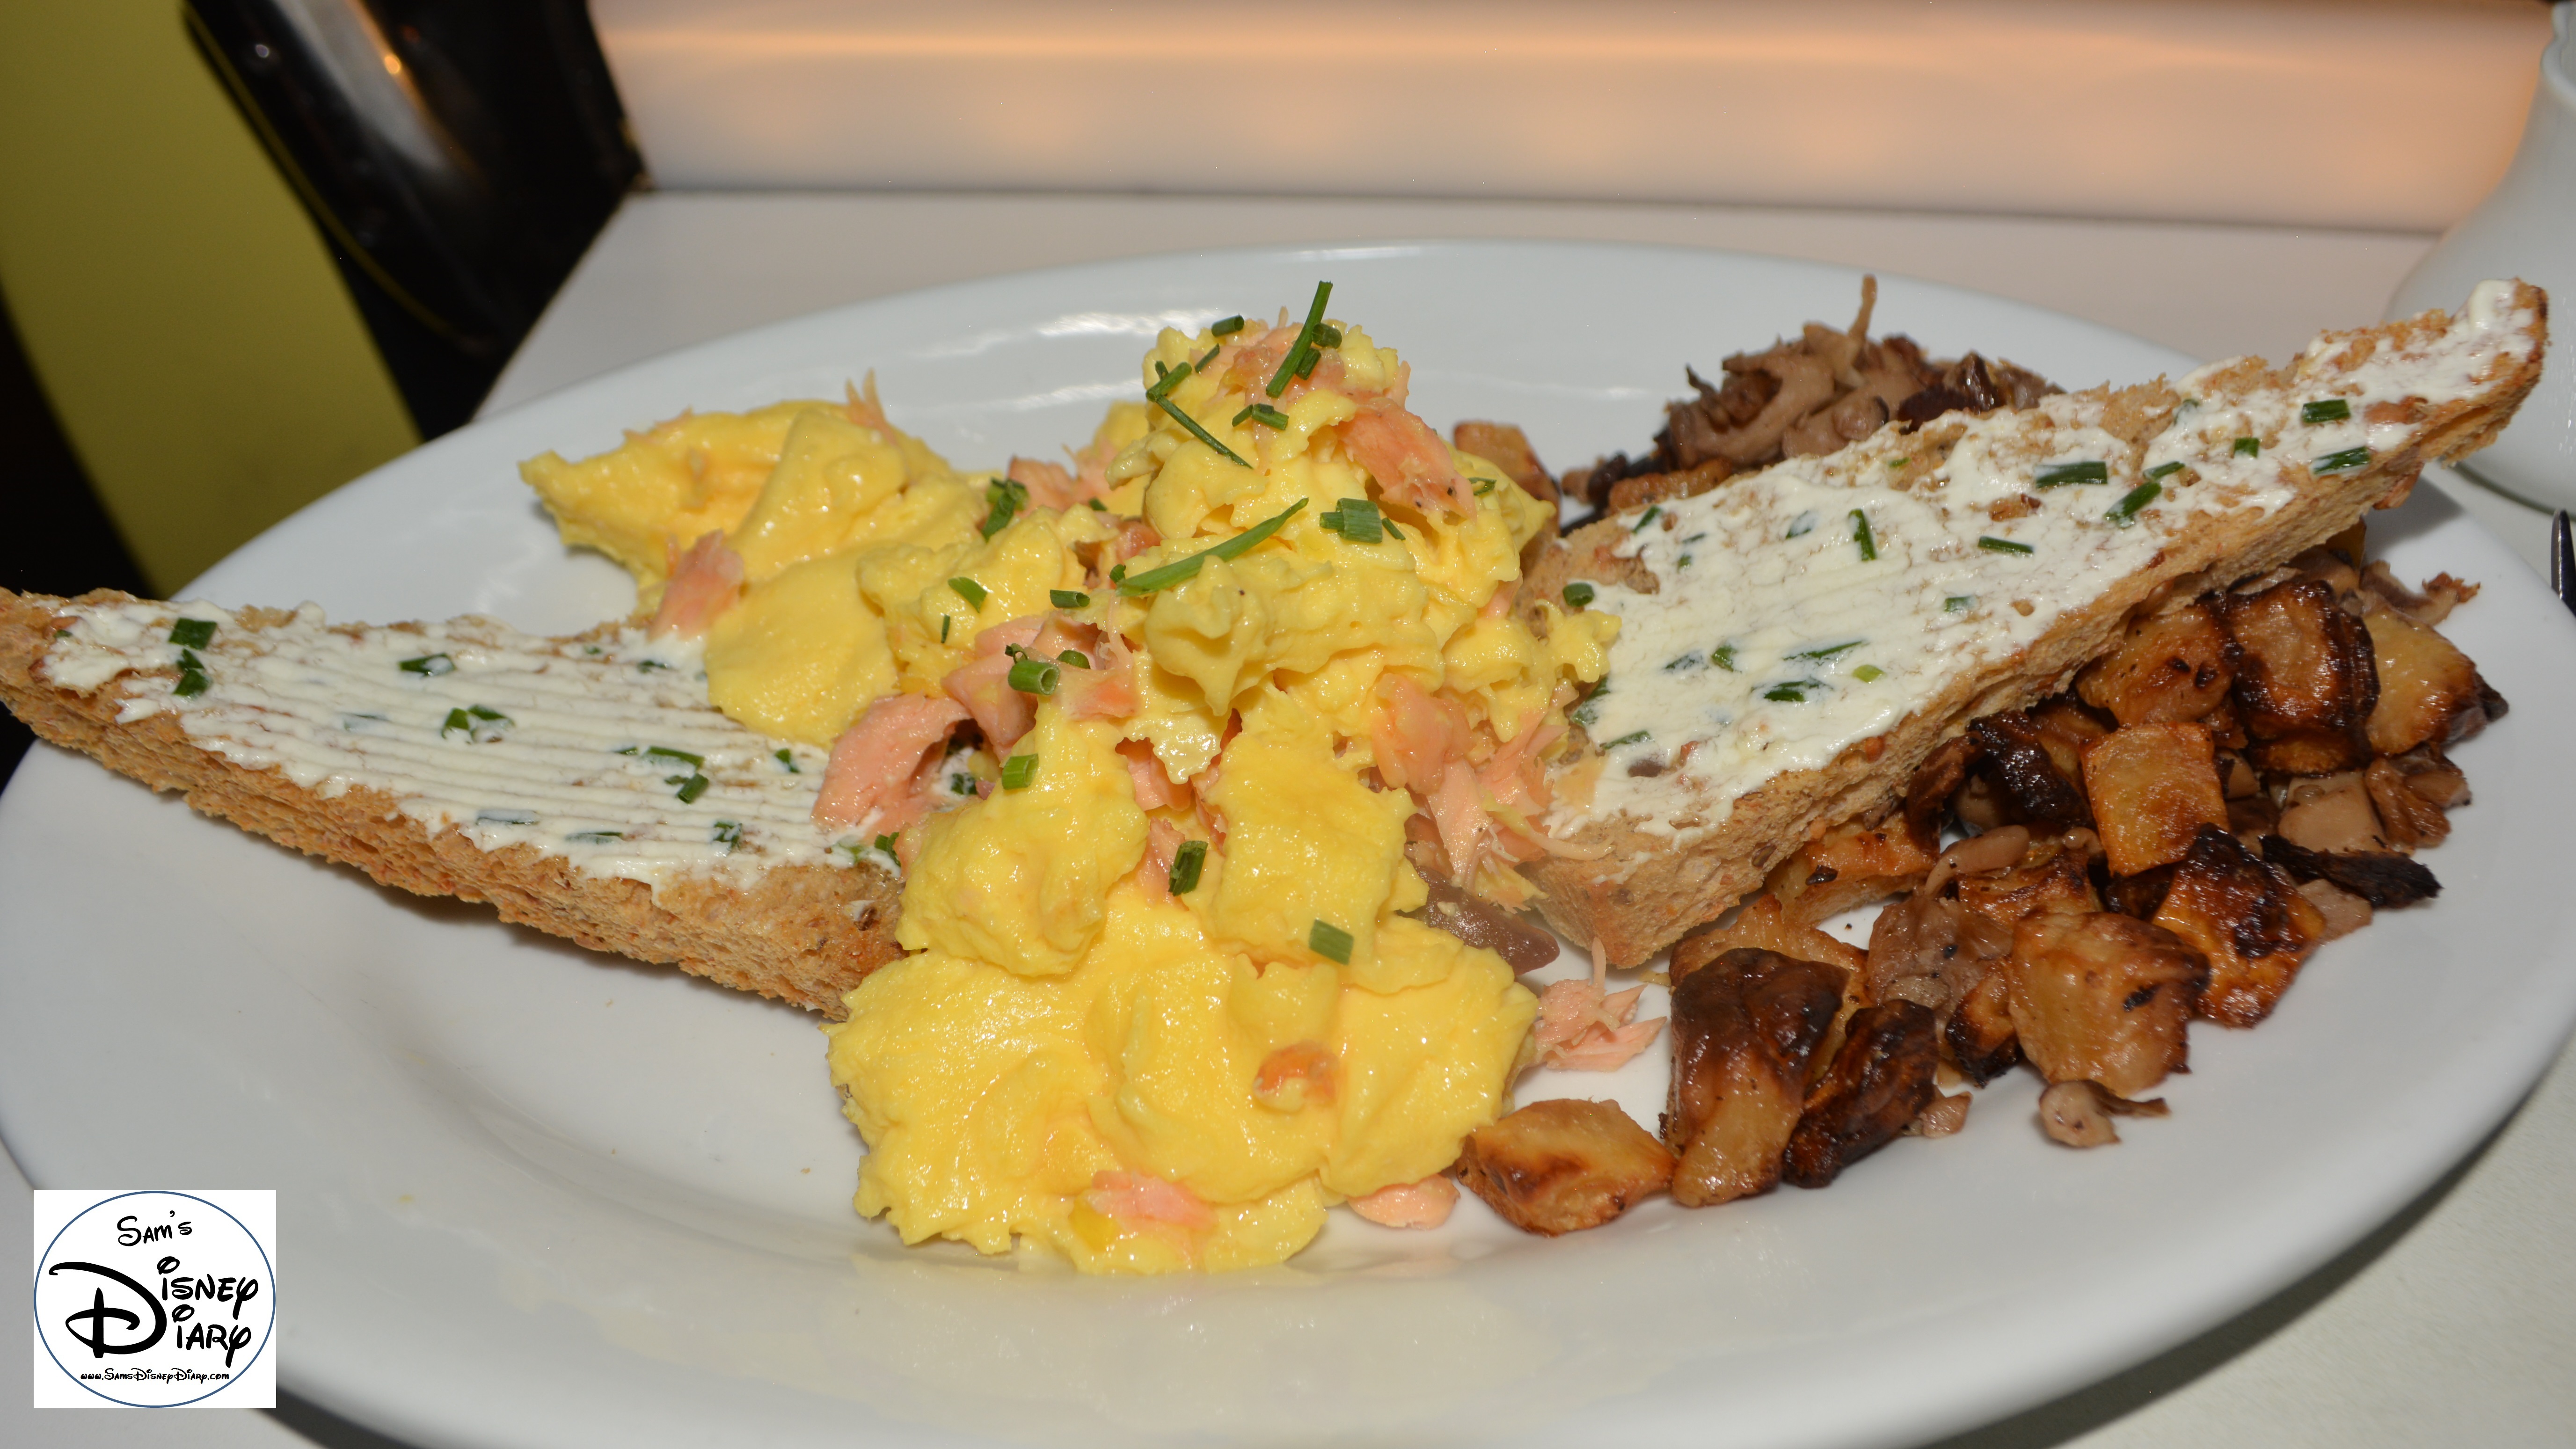 Star Wars Weekend Galactic Breakfast. The Dune Sea (House Smoked Salmon Scrambled Eggs, Wild Mushroom Potato Hash with Multi Grain Toast Slathered with Goat Cheese Butter